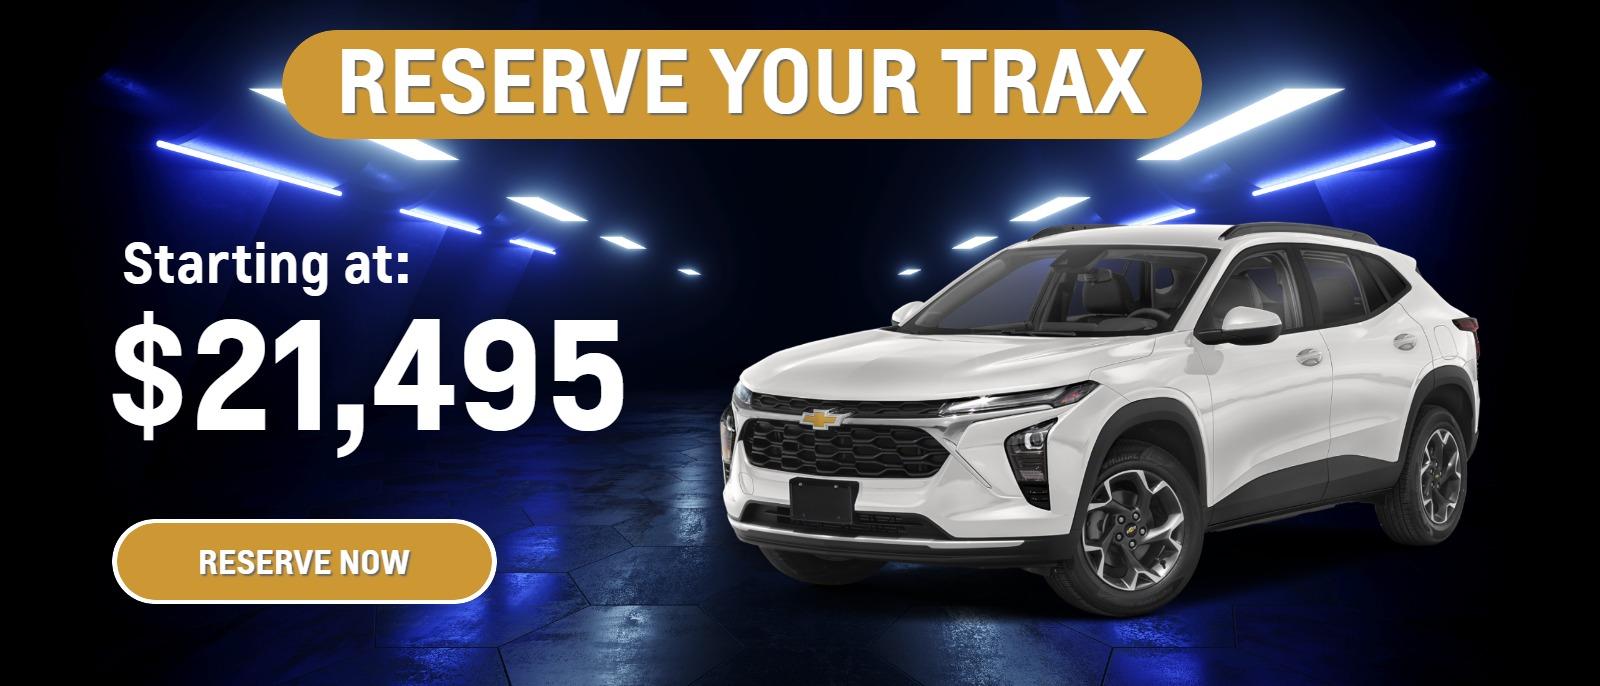 Reserve Your Trax
Starting at: $21,495